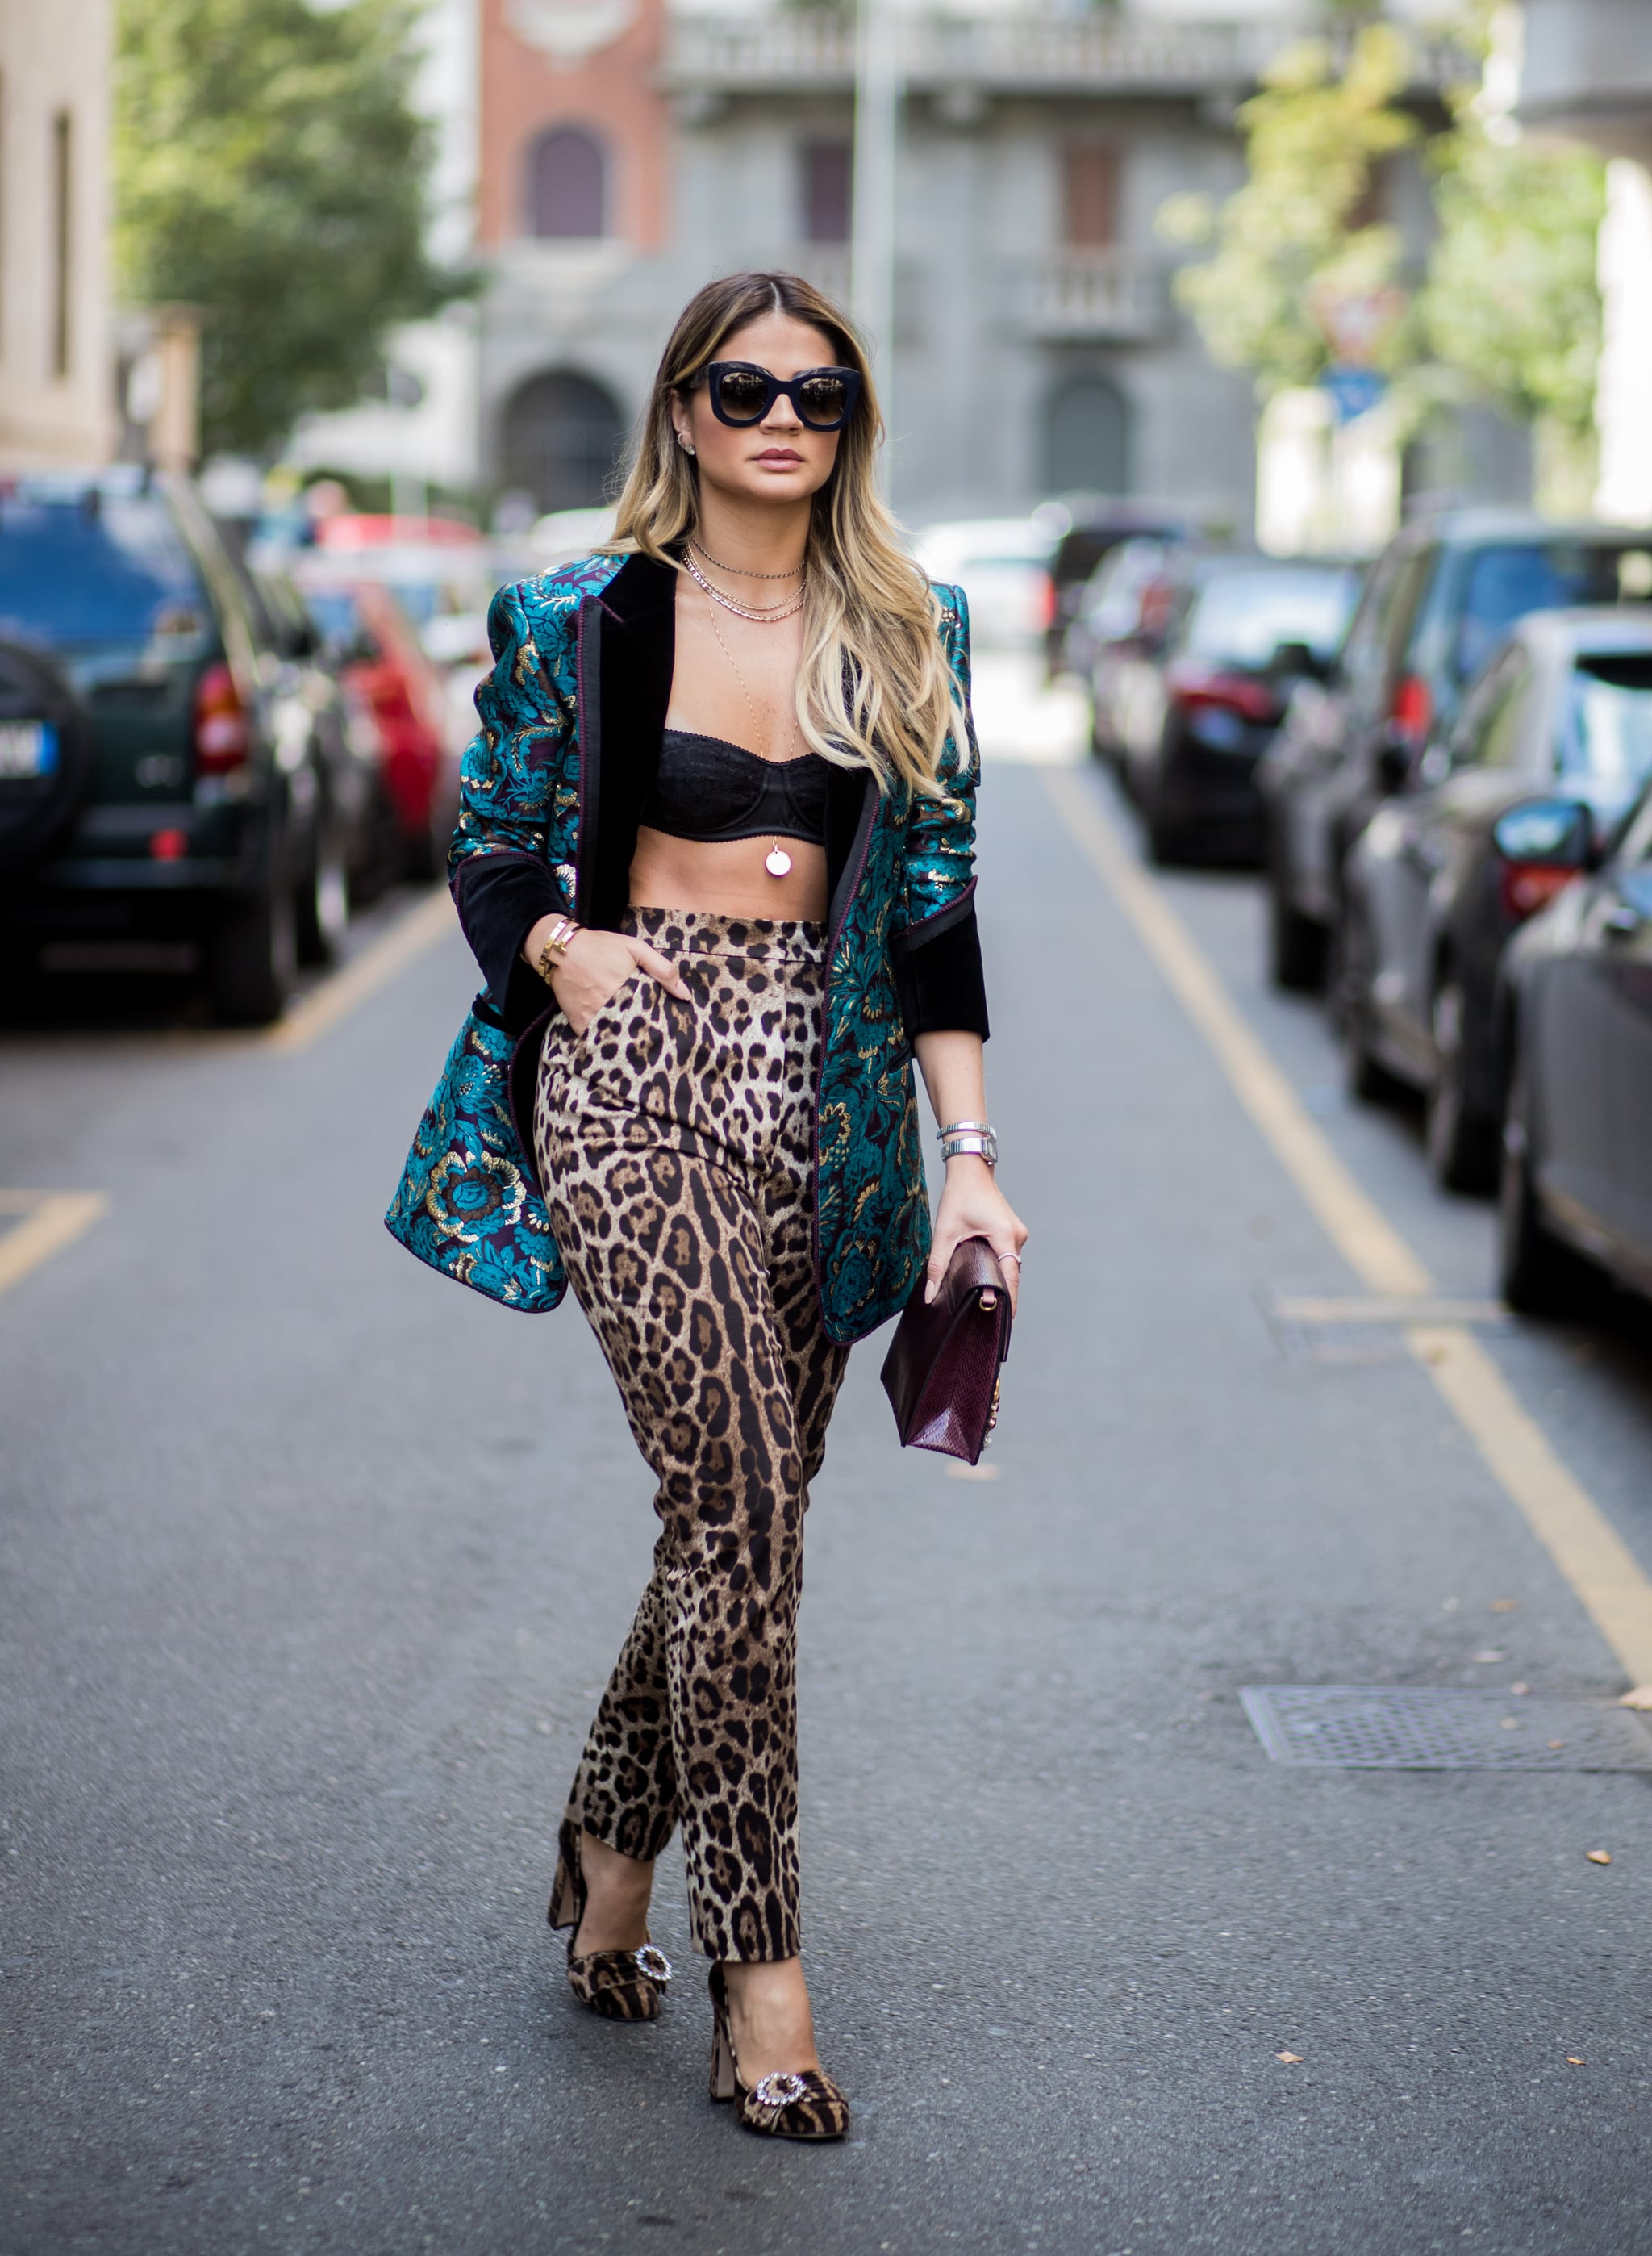 Style a Psychedelic Blazer With Animal-Print Trousers | 27 Chic Ways to Mix  and Match Prints Like a Pro | POPSUGAR Fashion Photo 10